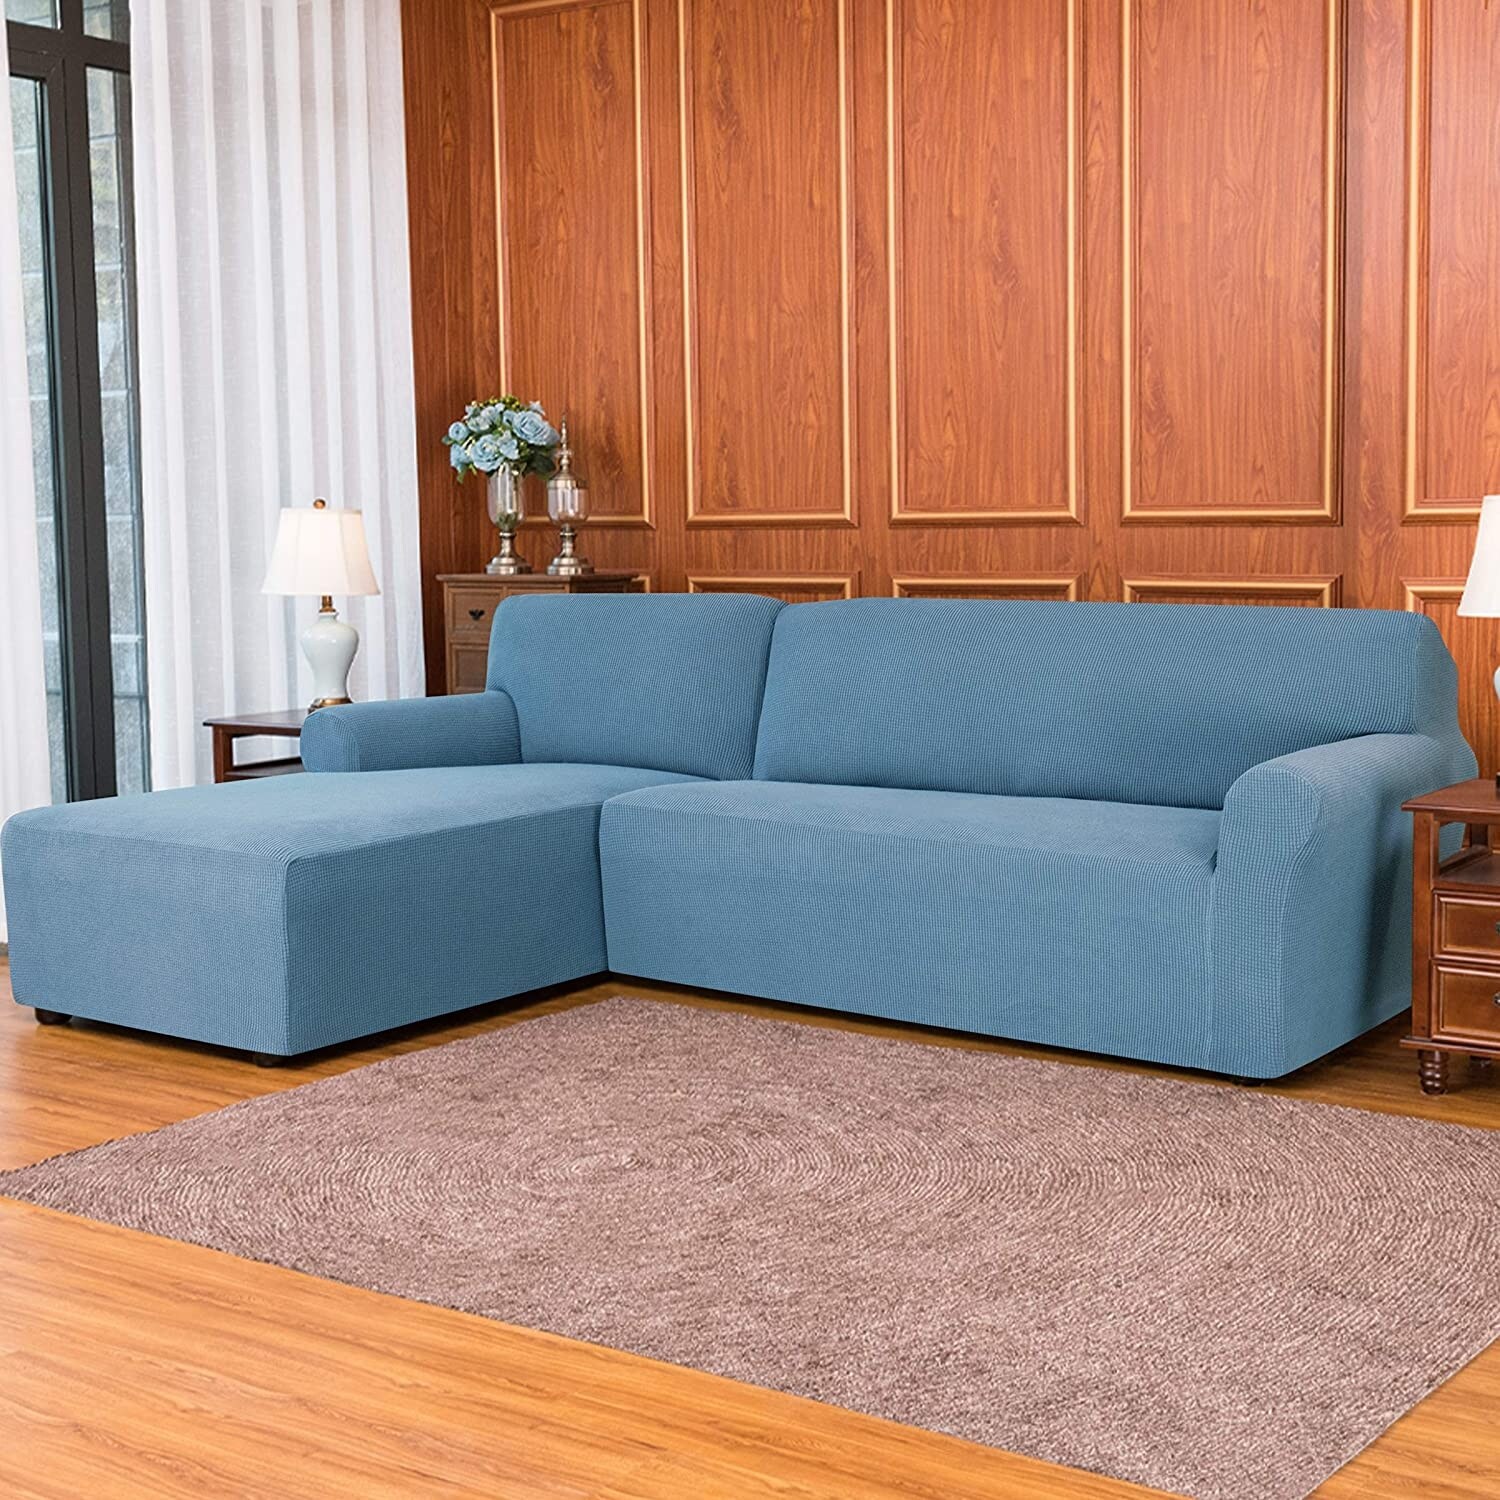 L Shape Must Buy 2 Pieces Details about   Corner Sofa Covers for Room Cover Stretch Slipcover 